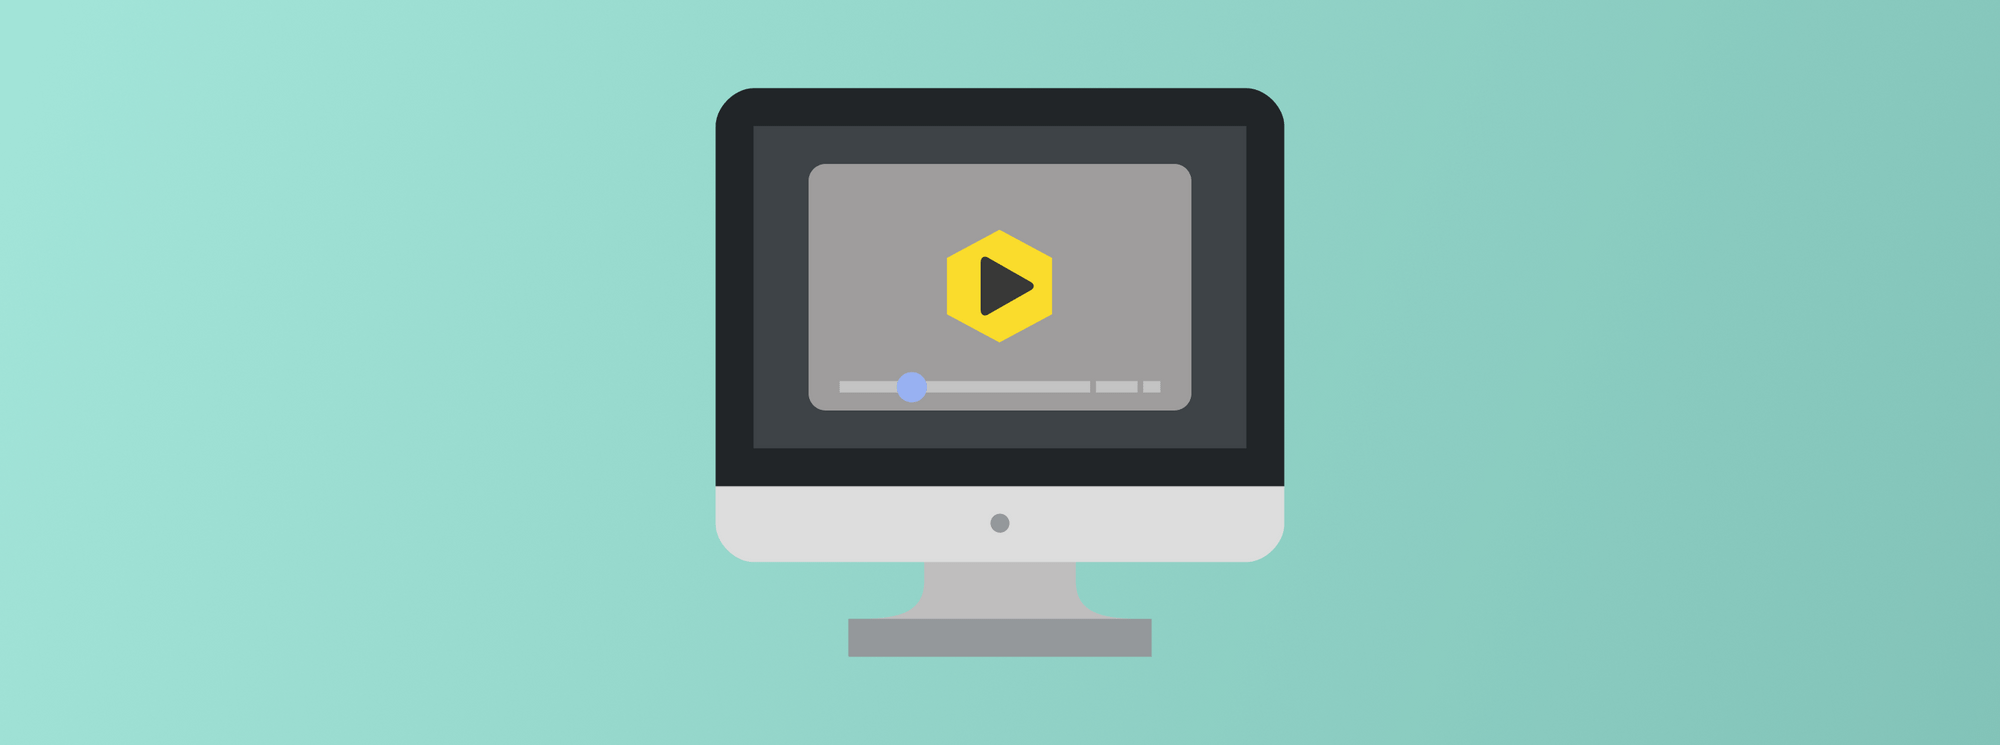 Top 12 Tips for Creating Exceptional Marketing Videos